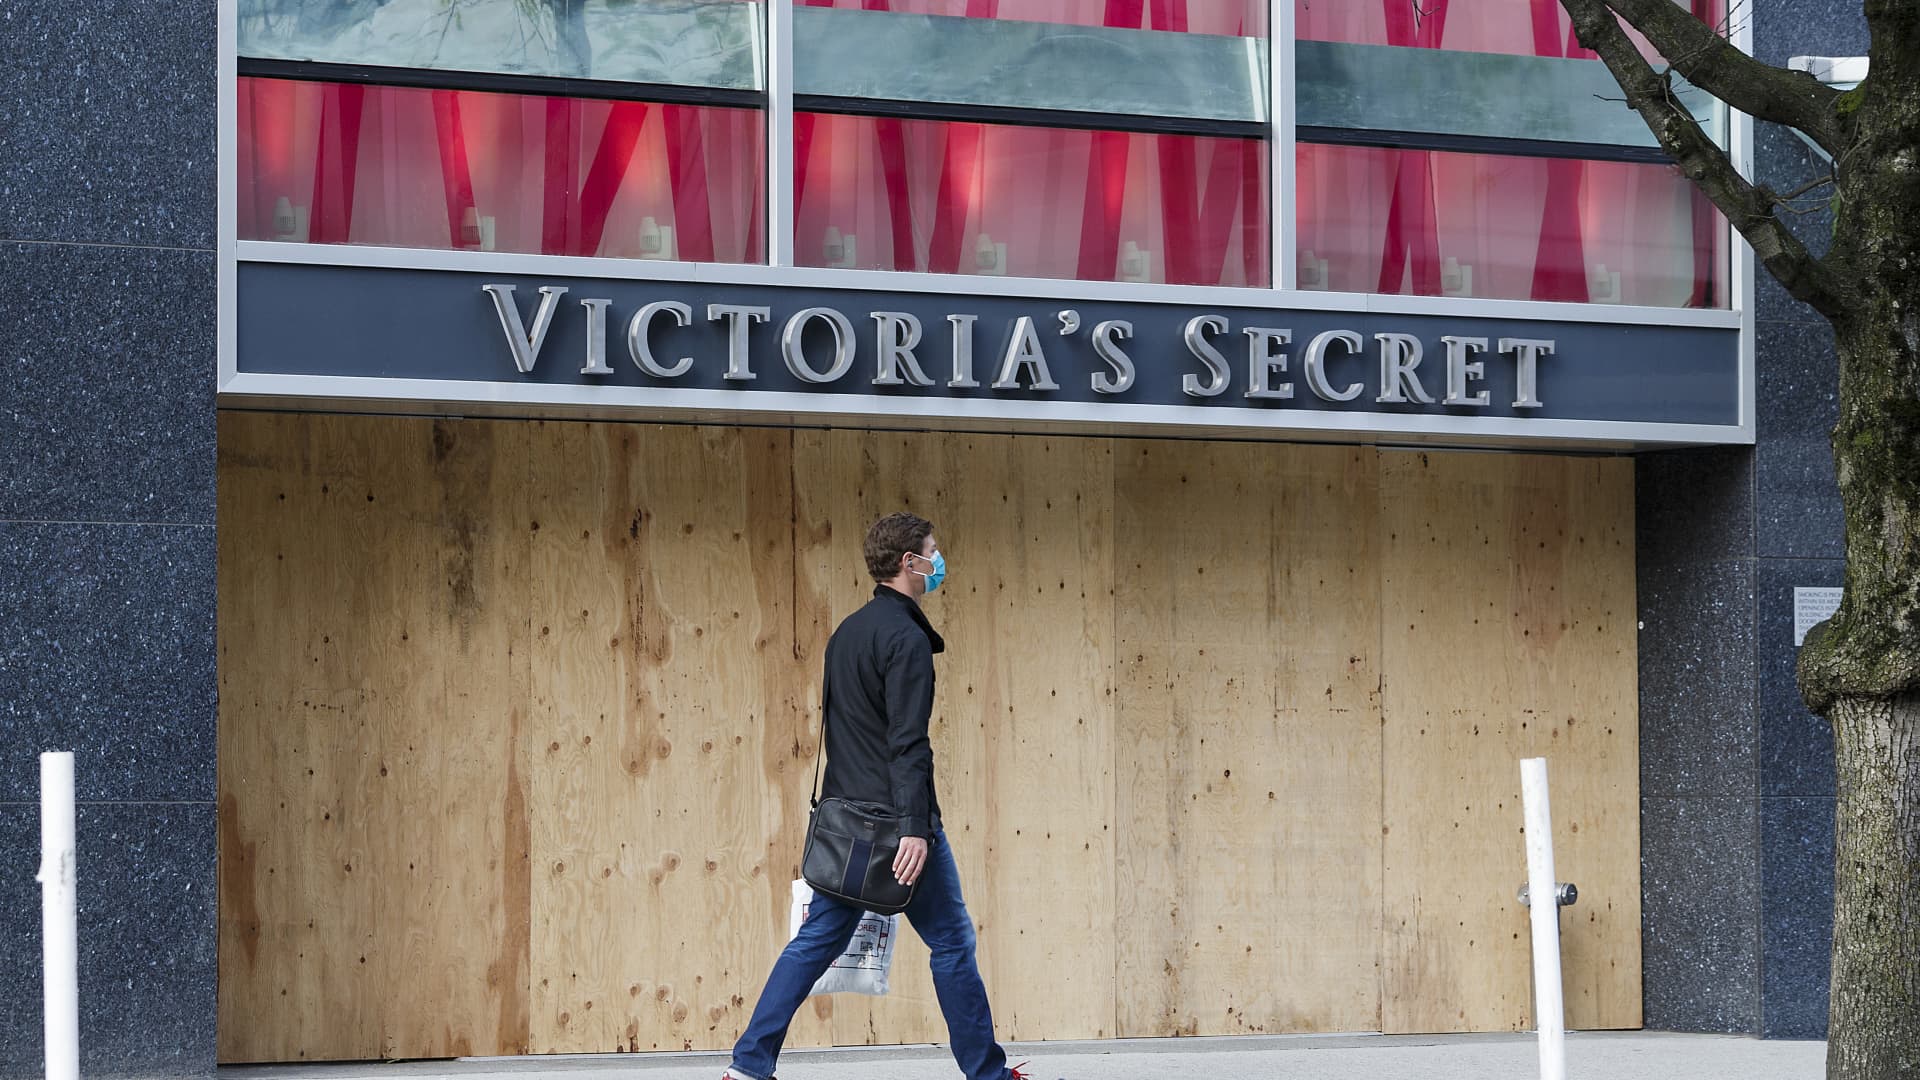 A pedestrian walks past a Victoria's Secret storefront closed and boarded up on Robson Street during the COVID-19 crisis on April 17, 2020 in Vancouver, Canada.